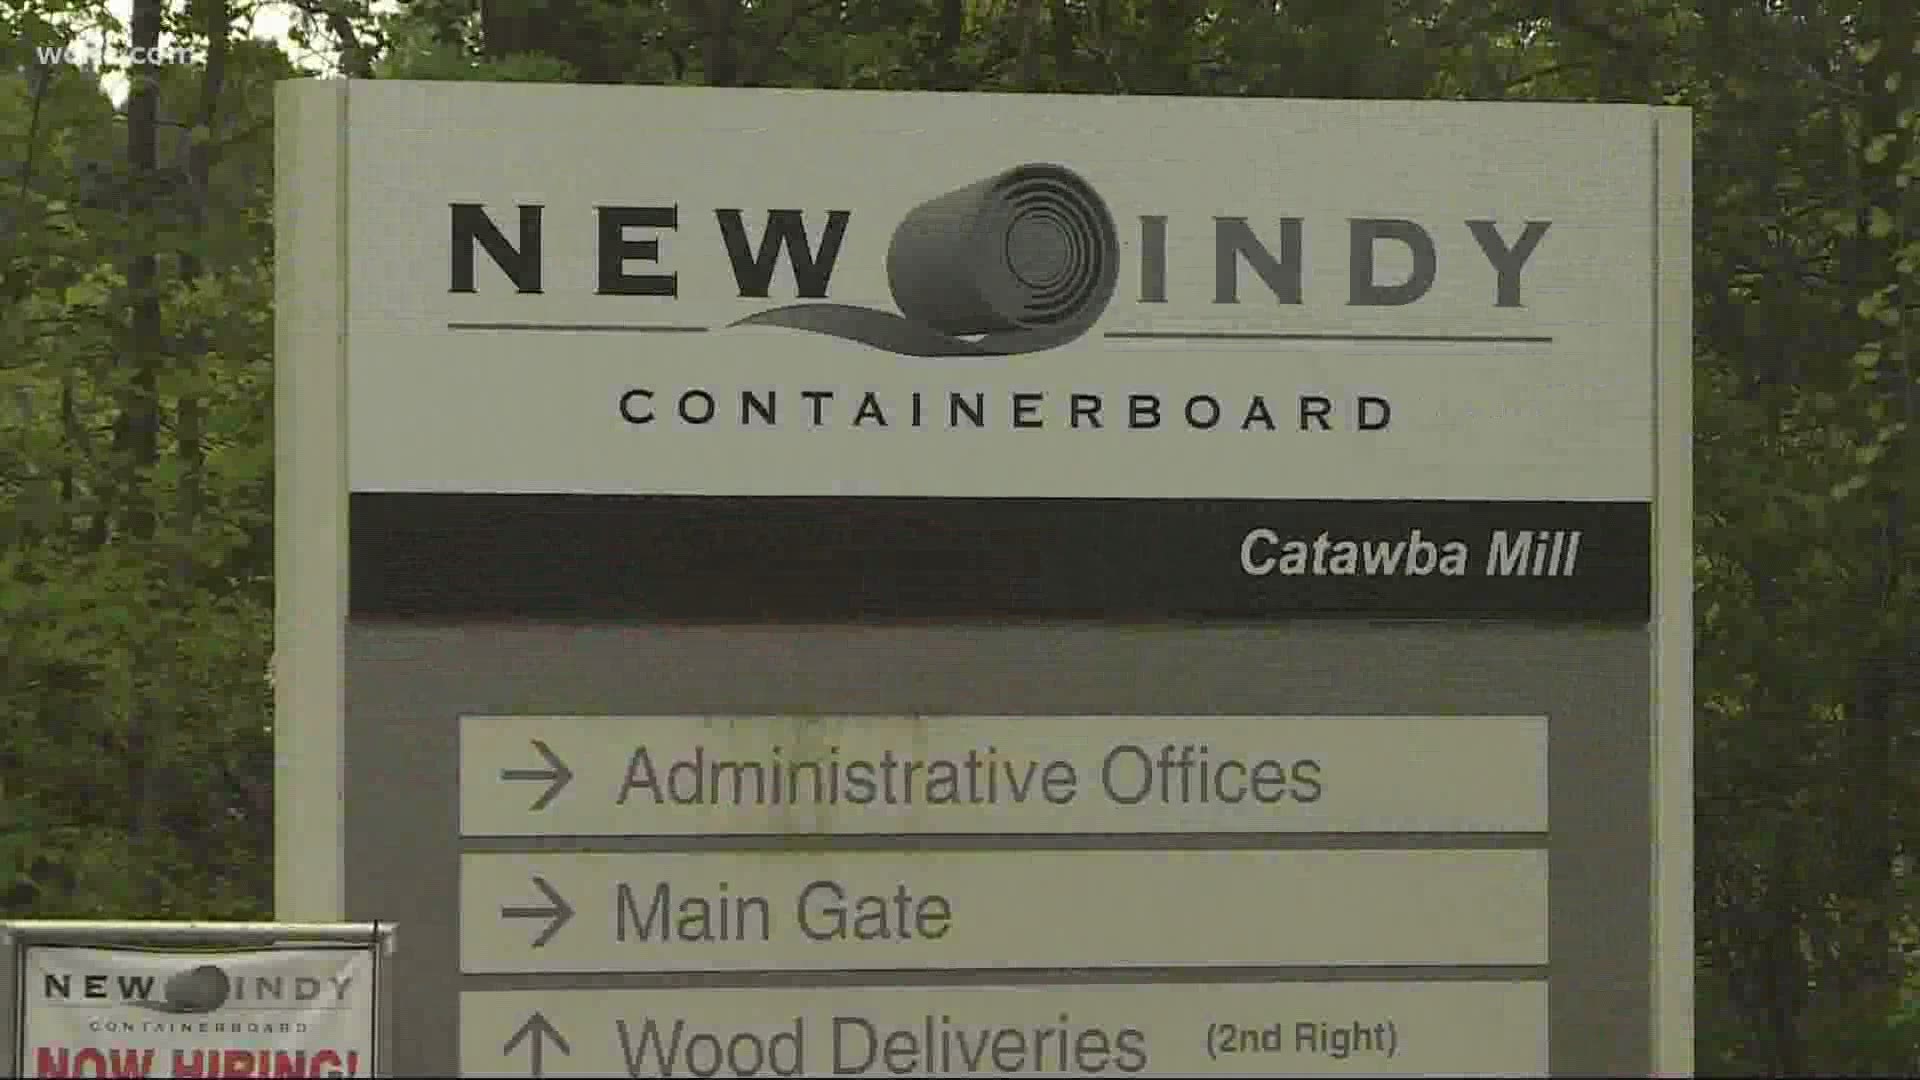 New Indy Containerboard requests emissions increase as odor investigation continues